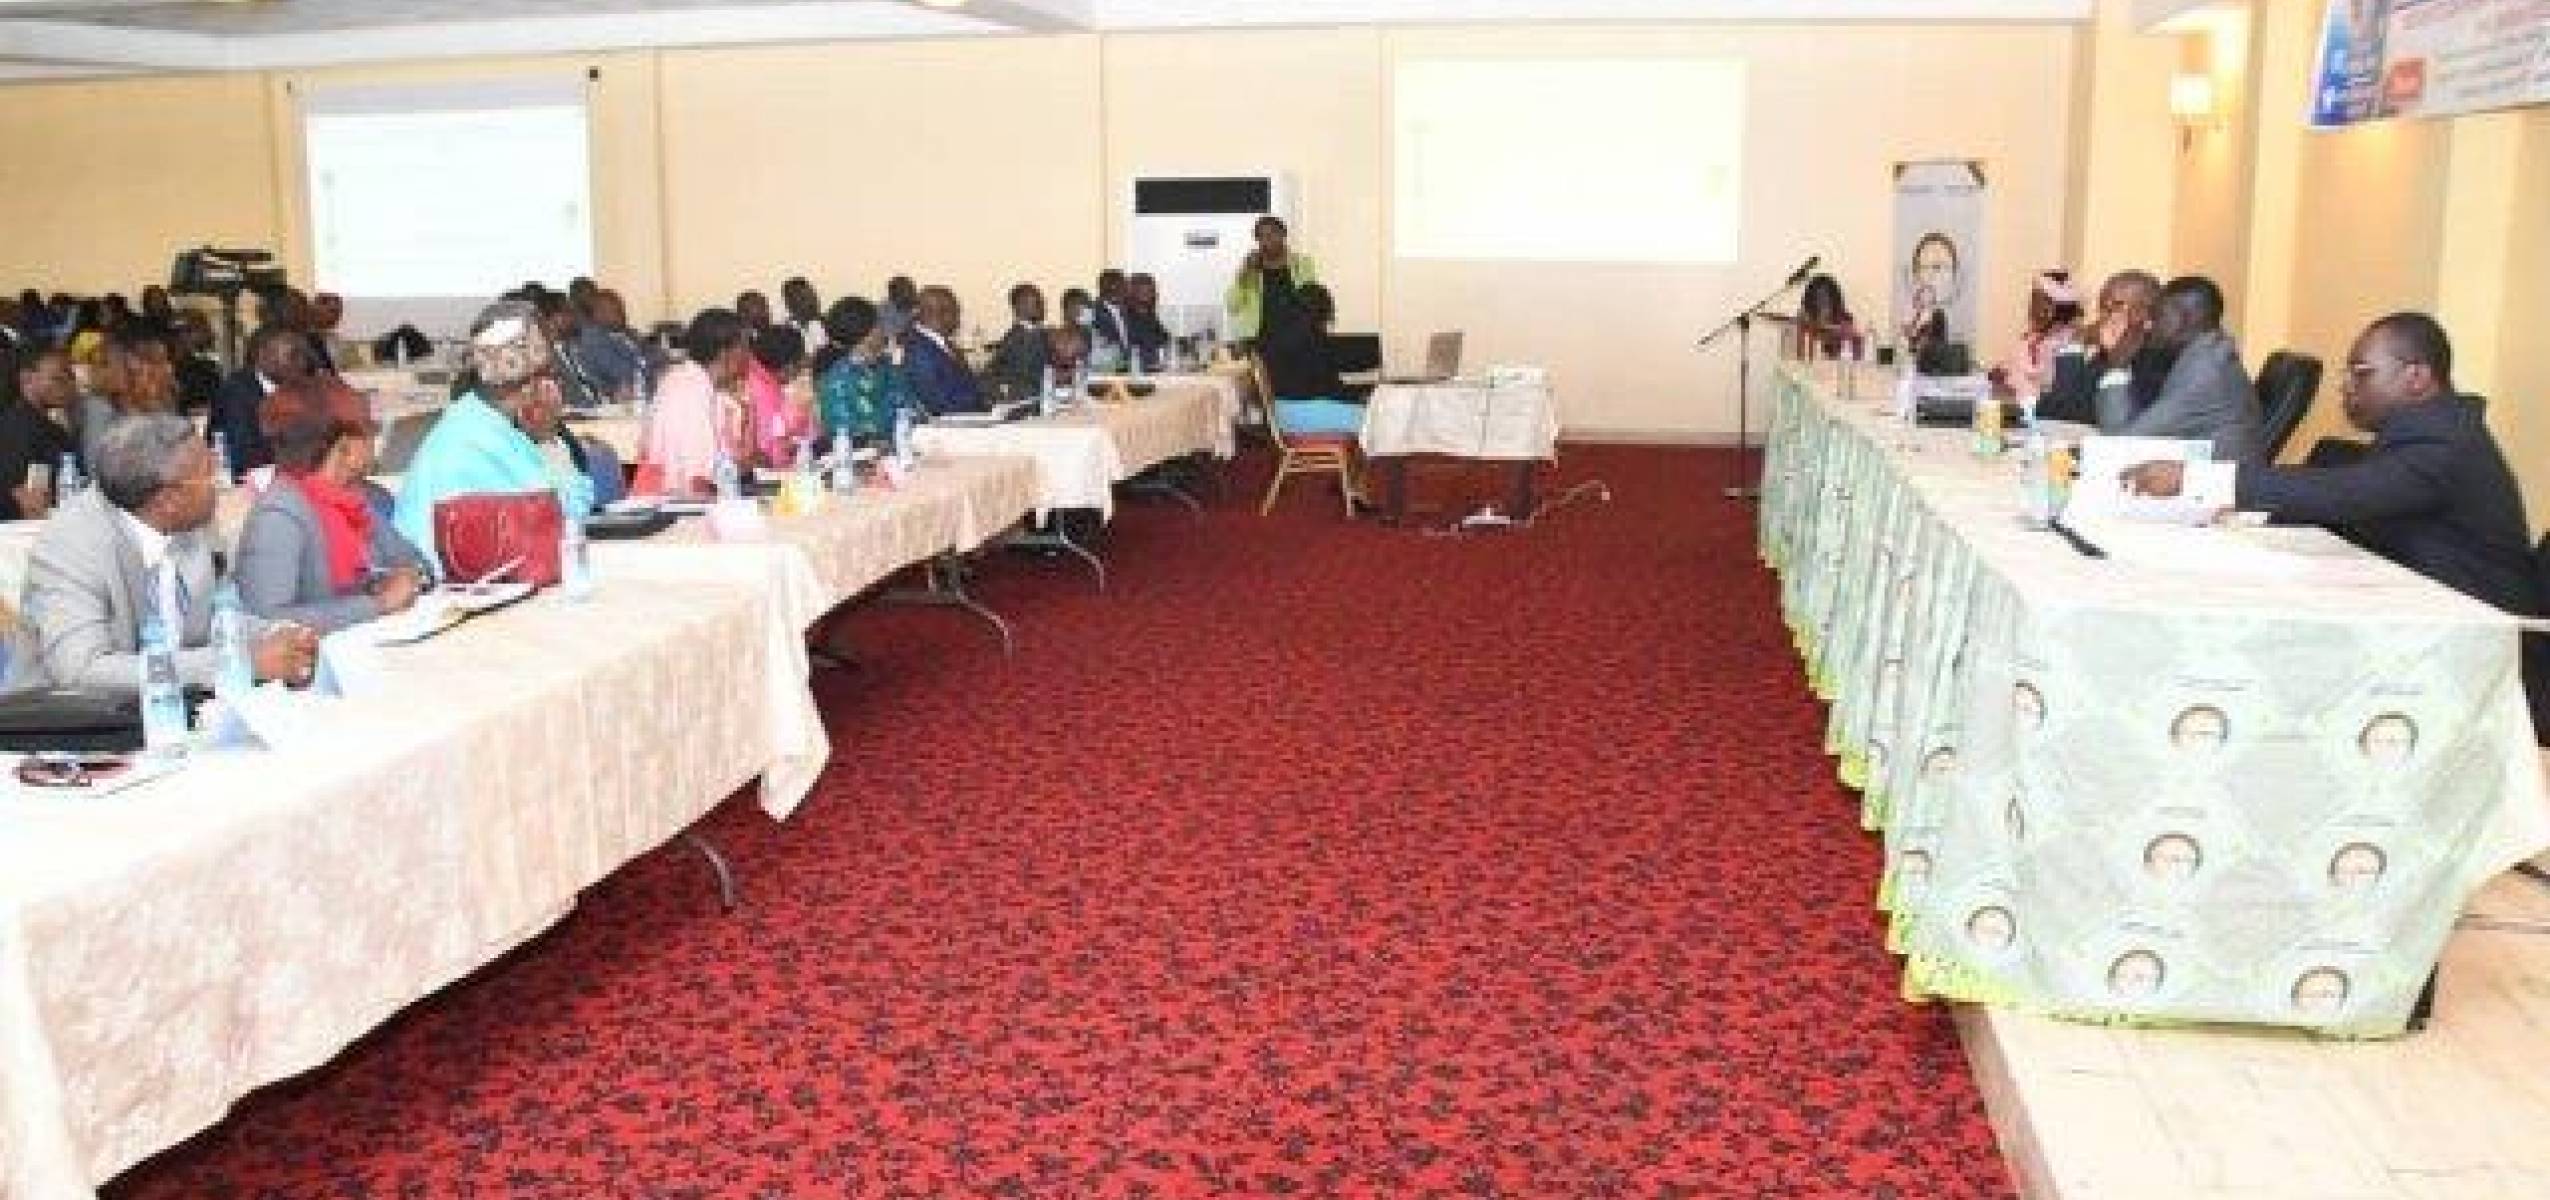  MINFOPRA chairs a seminar of stakeholders involved in the state human resources management chain.